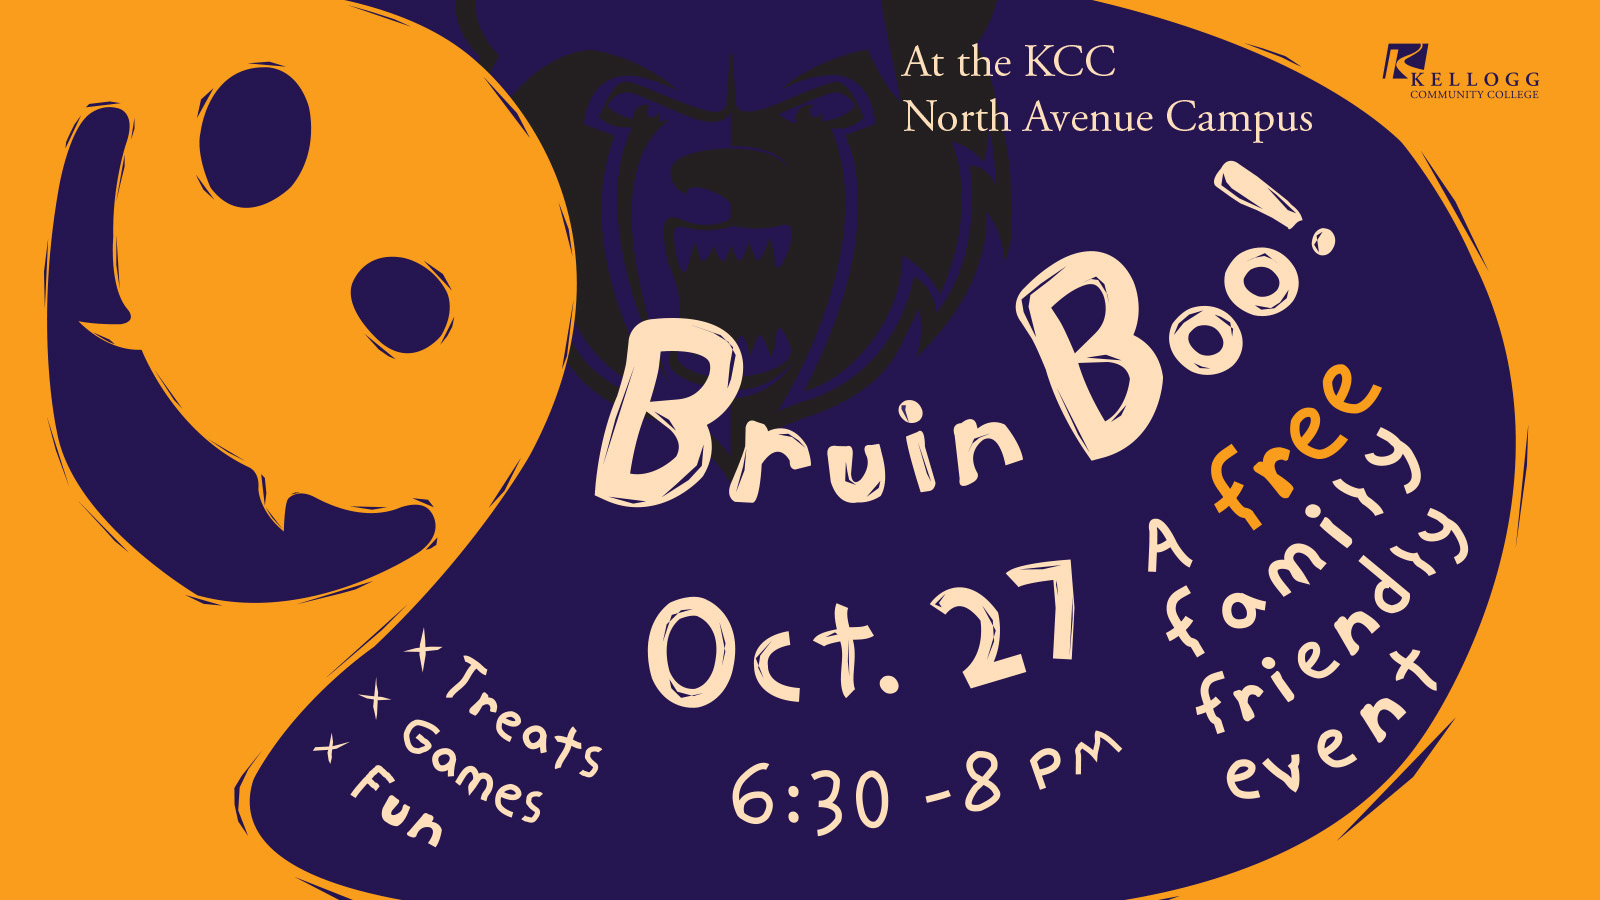 A text slide promoting KCC's upcoming Bruin Boo! community Halloween event on Oct. 27 on campus in Battle Creek.